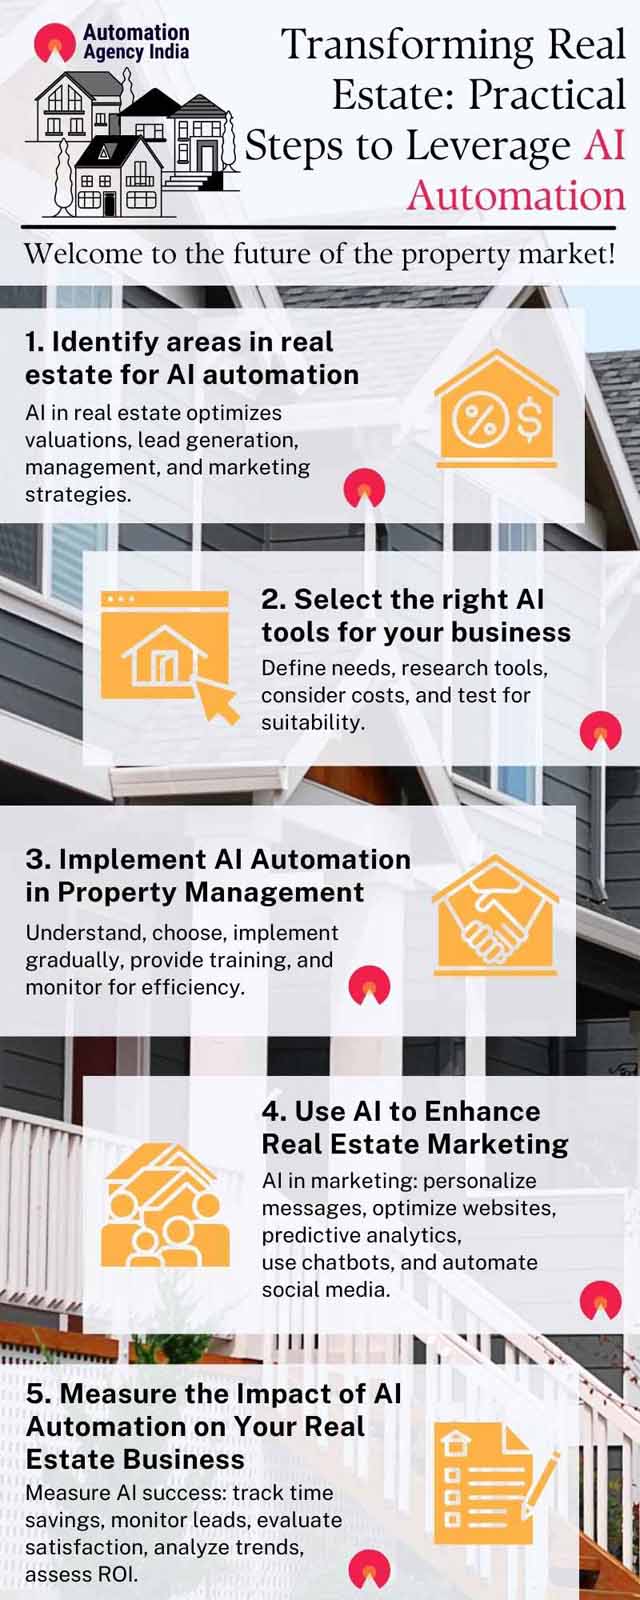 Infographic on AI Automation for Real Estate: Steps to Leverage